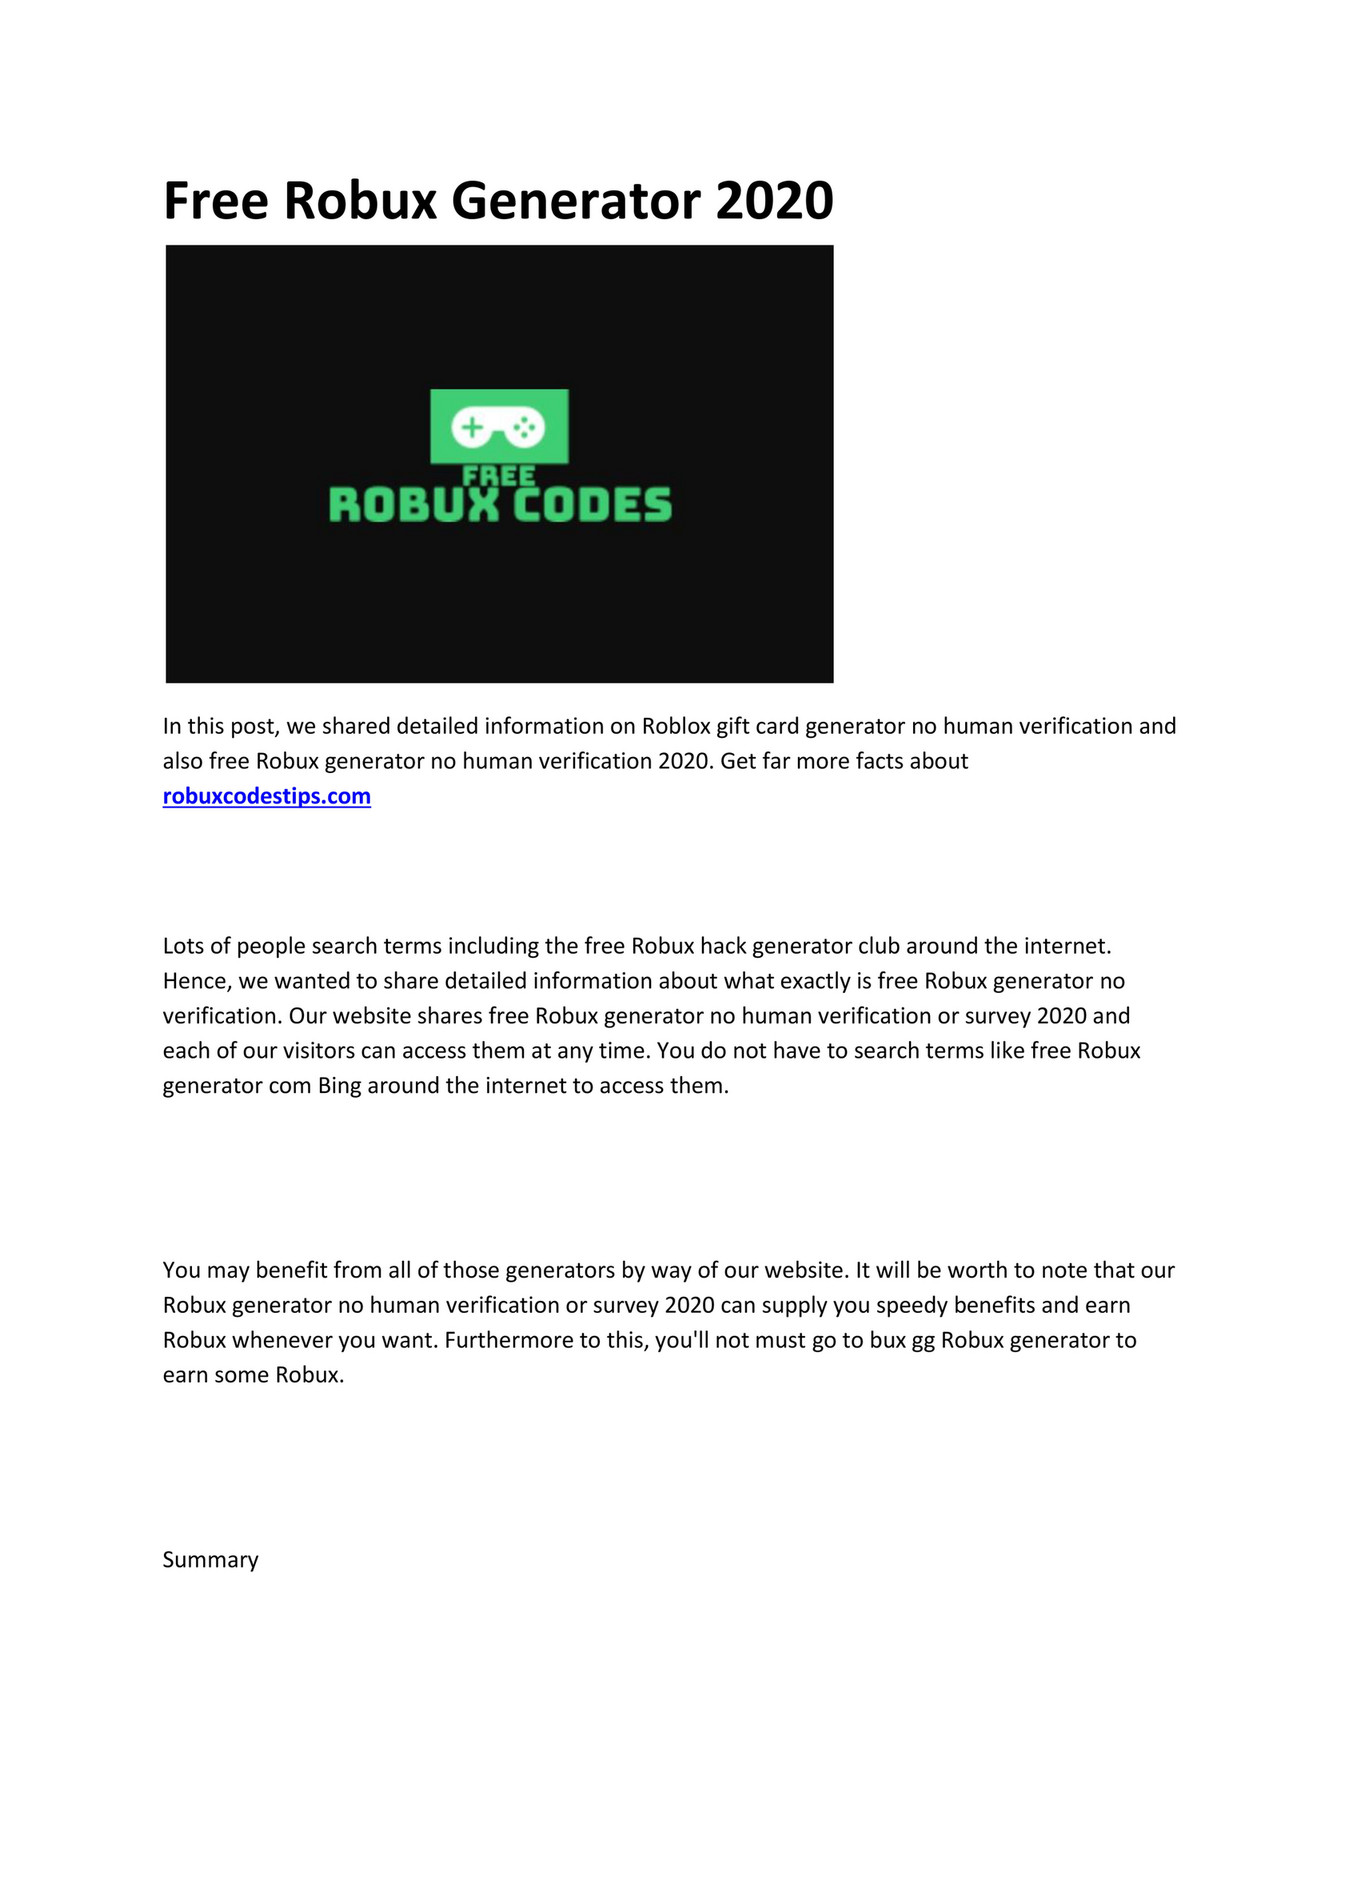 My Publications Free Robux Codes Generator 2020 5k Free Rubox Daily Page 2 3 Created With Publitas Com - best website to earn free robux